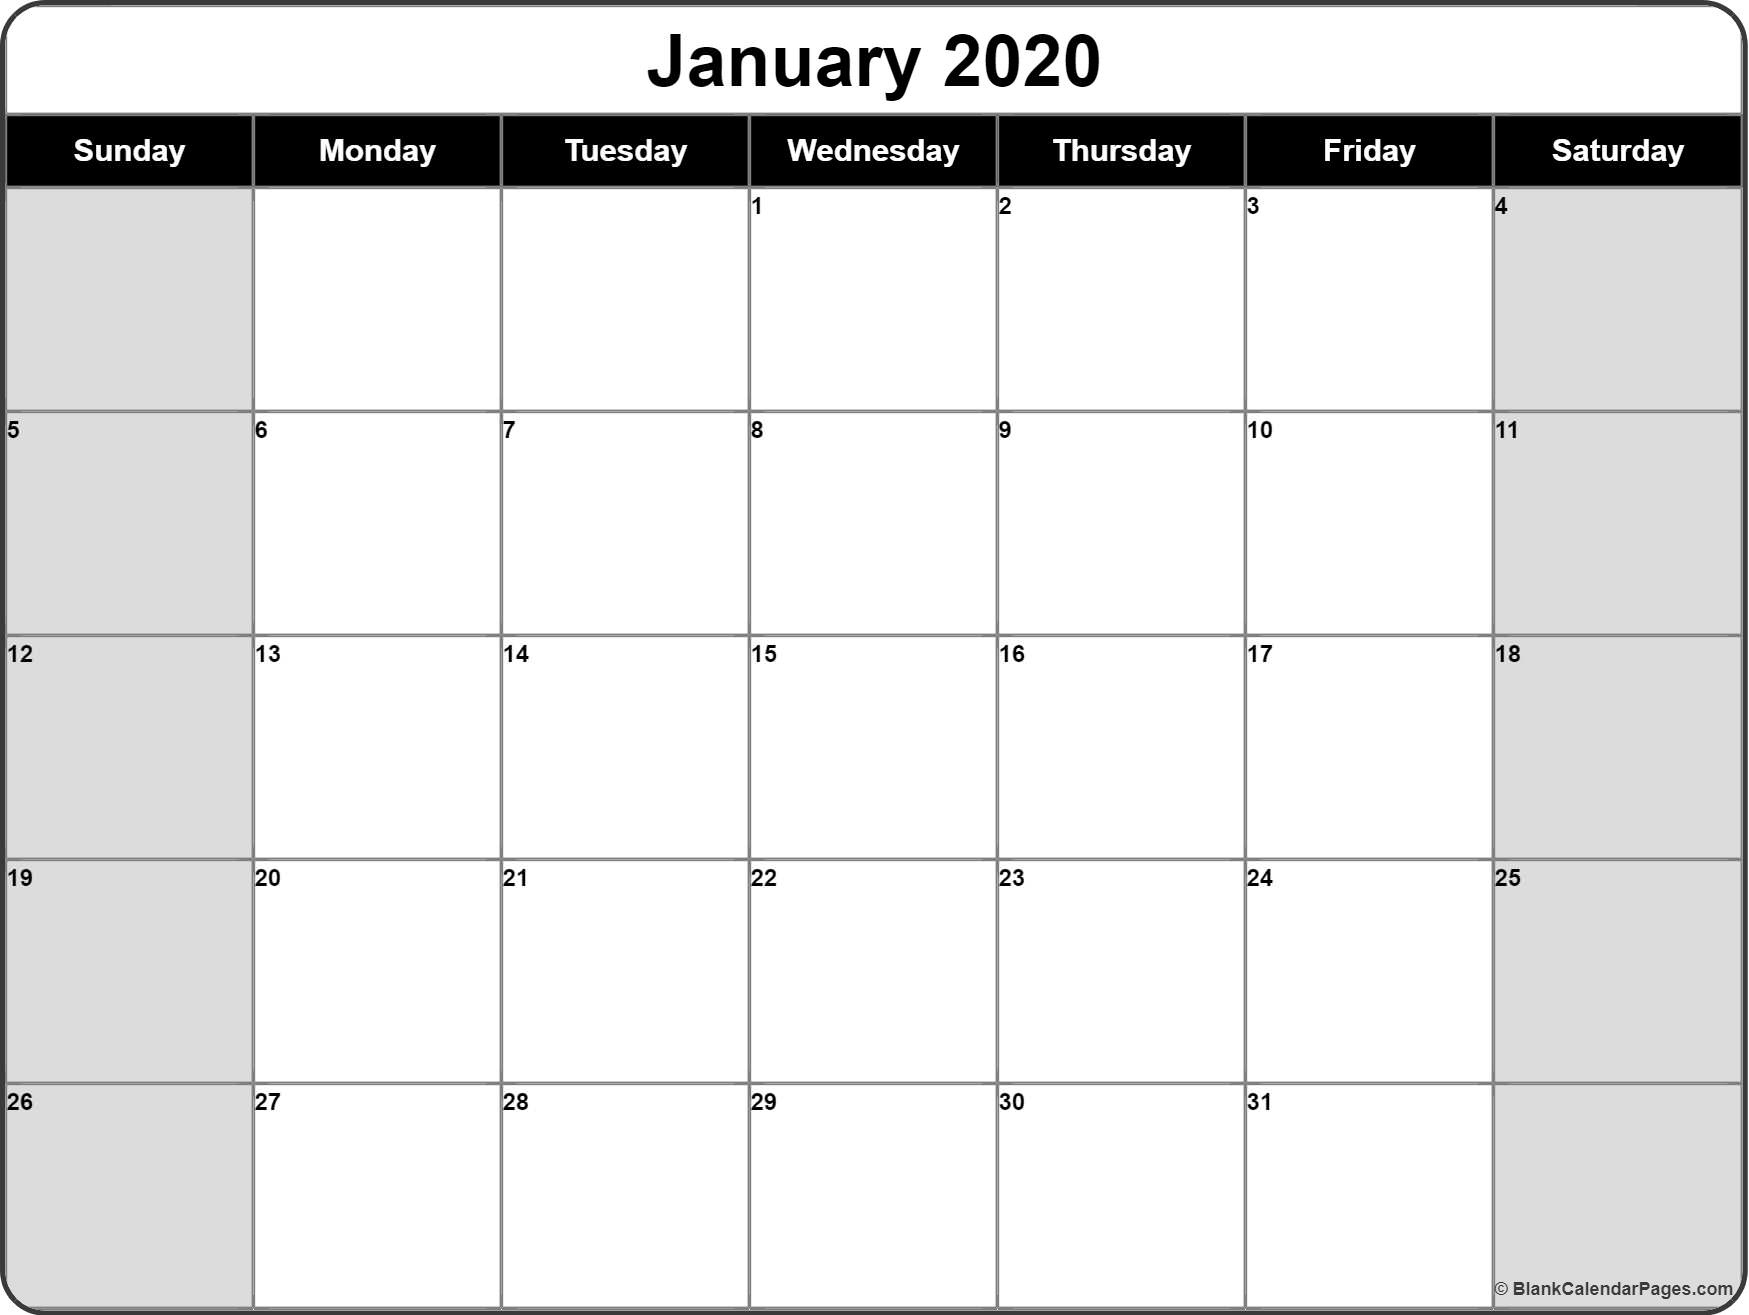 January 2020 Calendar | Free Printable Monthly Calendars Extraordinary Monthly Calendar 2020 Without Weekends